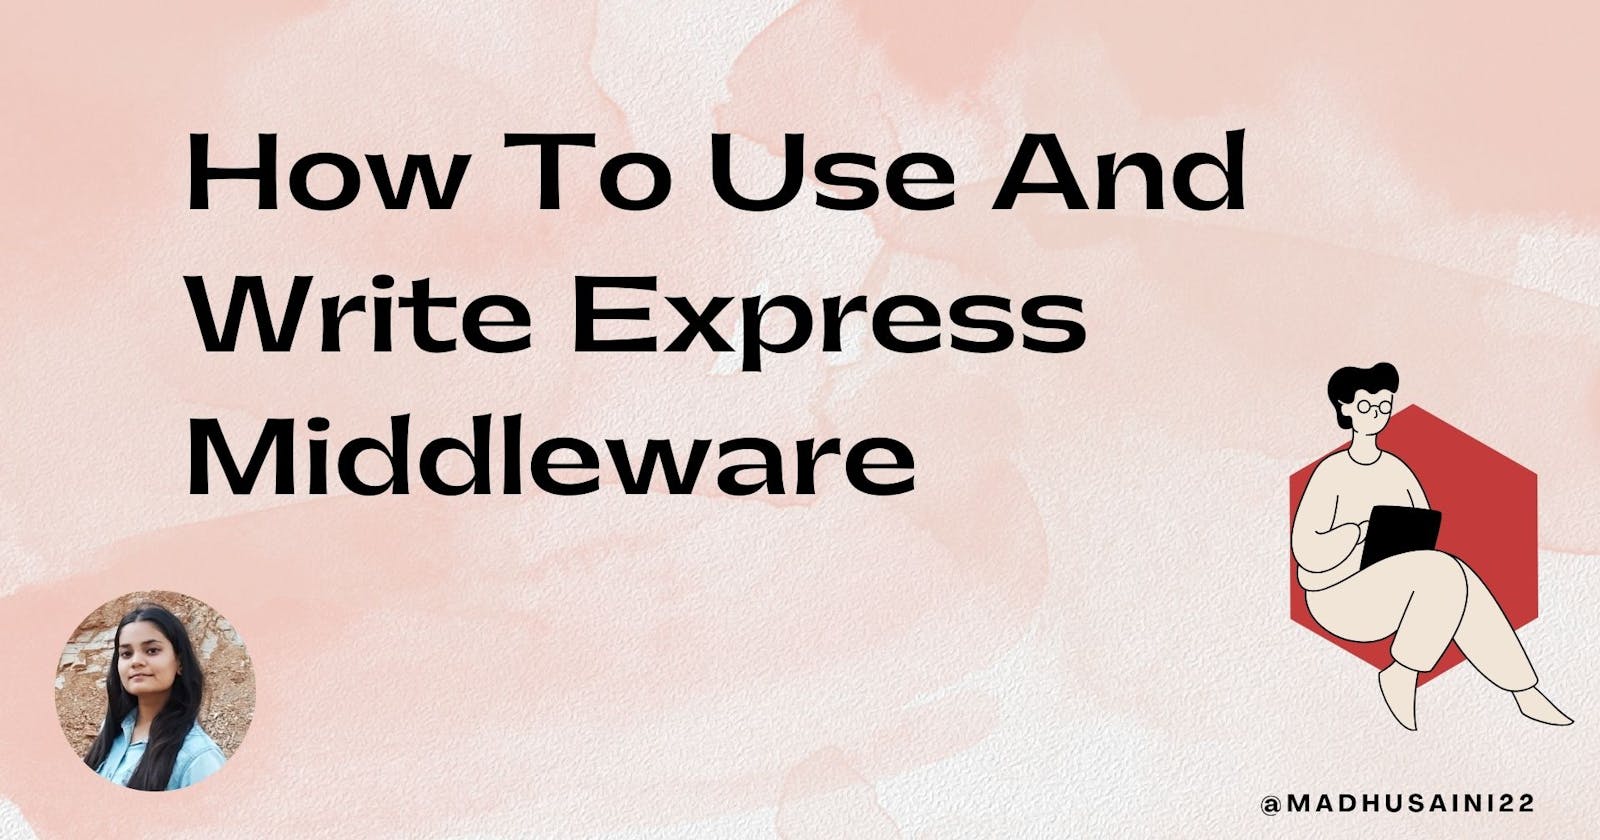 How To Use And Write Express Middleware